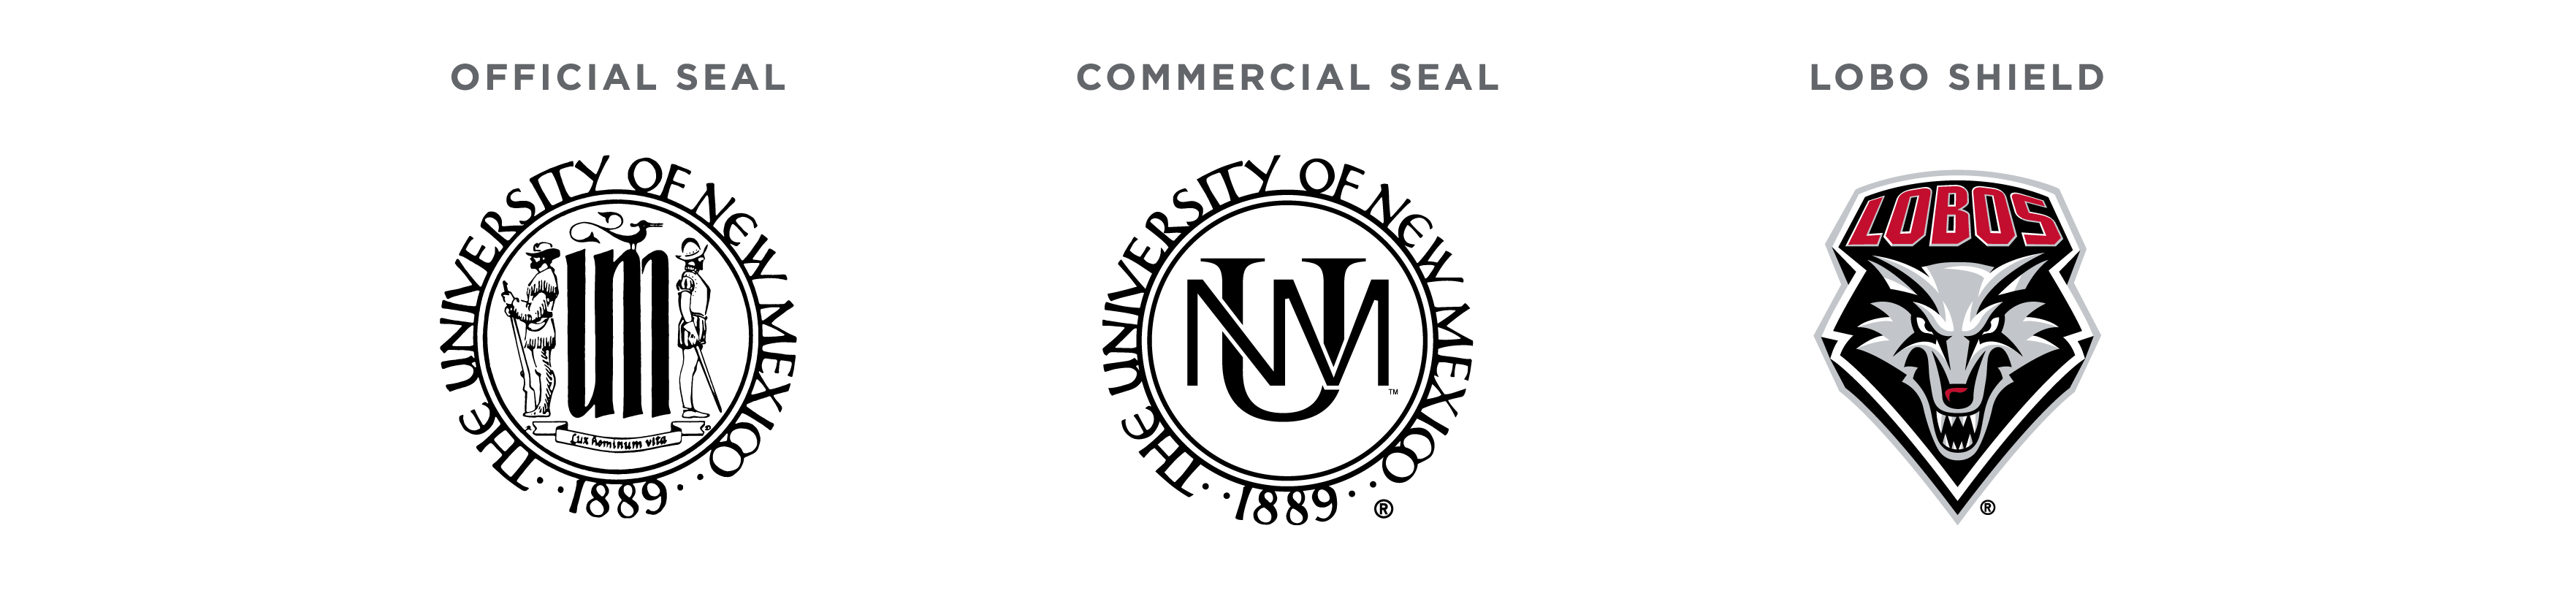 official seal commercial seal and athletics shield